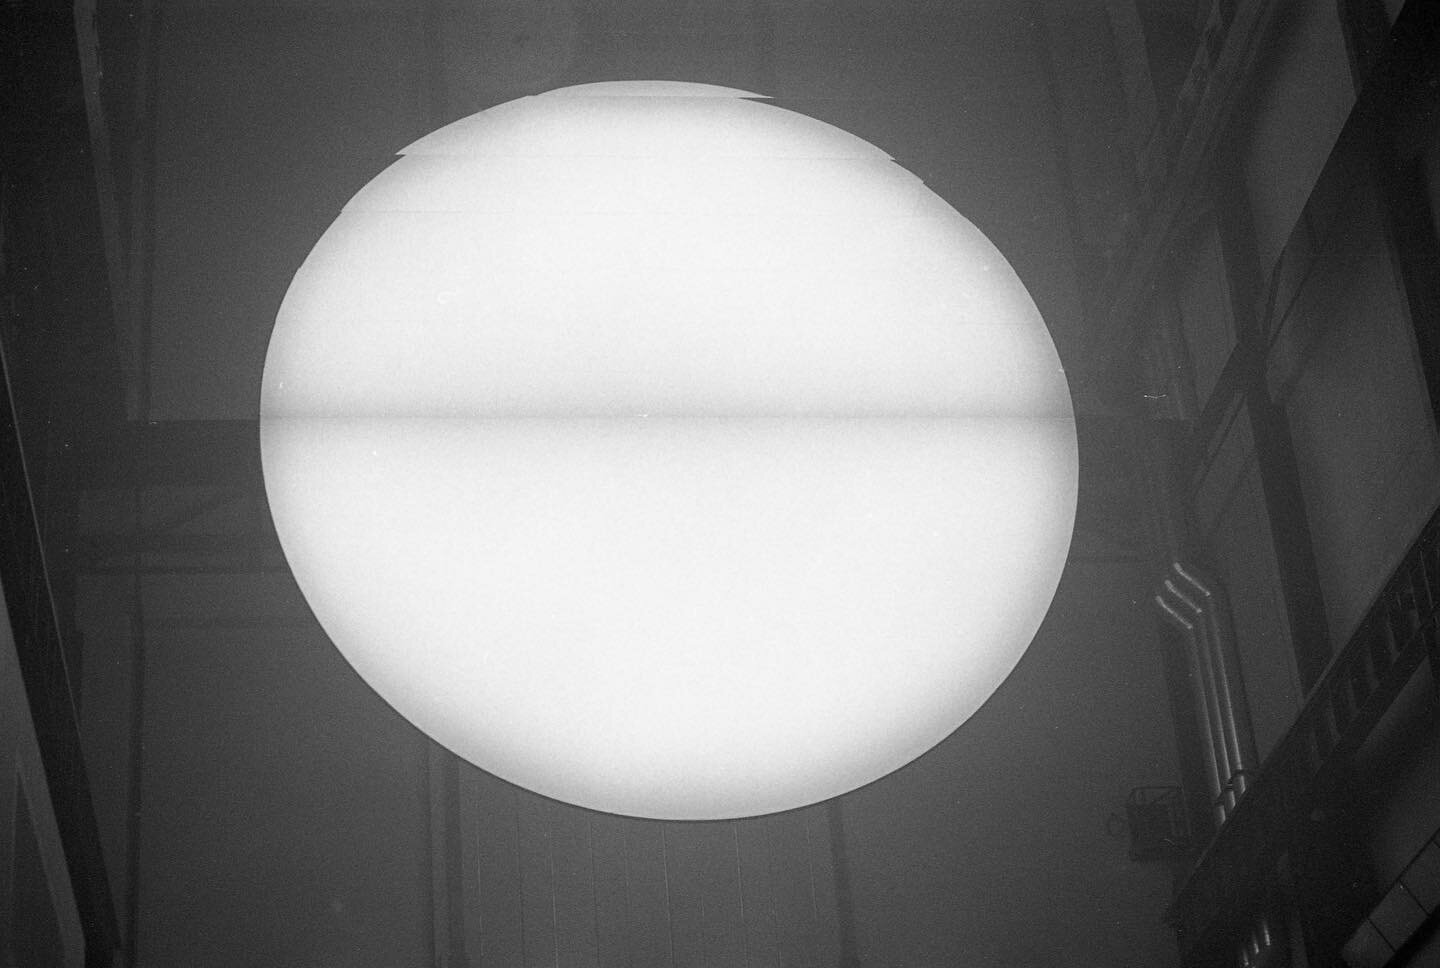 This week I processed B/W film I took 20 years ago of @studioolafureliasson &lsquo;The weather project&rsquo; 2003 @tate 

A huge orange misty glowing orb hovered near the ceiling of the Turbine hall (Pic no.1)

What&rsquo;s behind the Sun? (Pic no.2